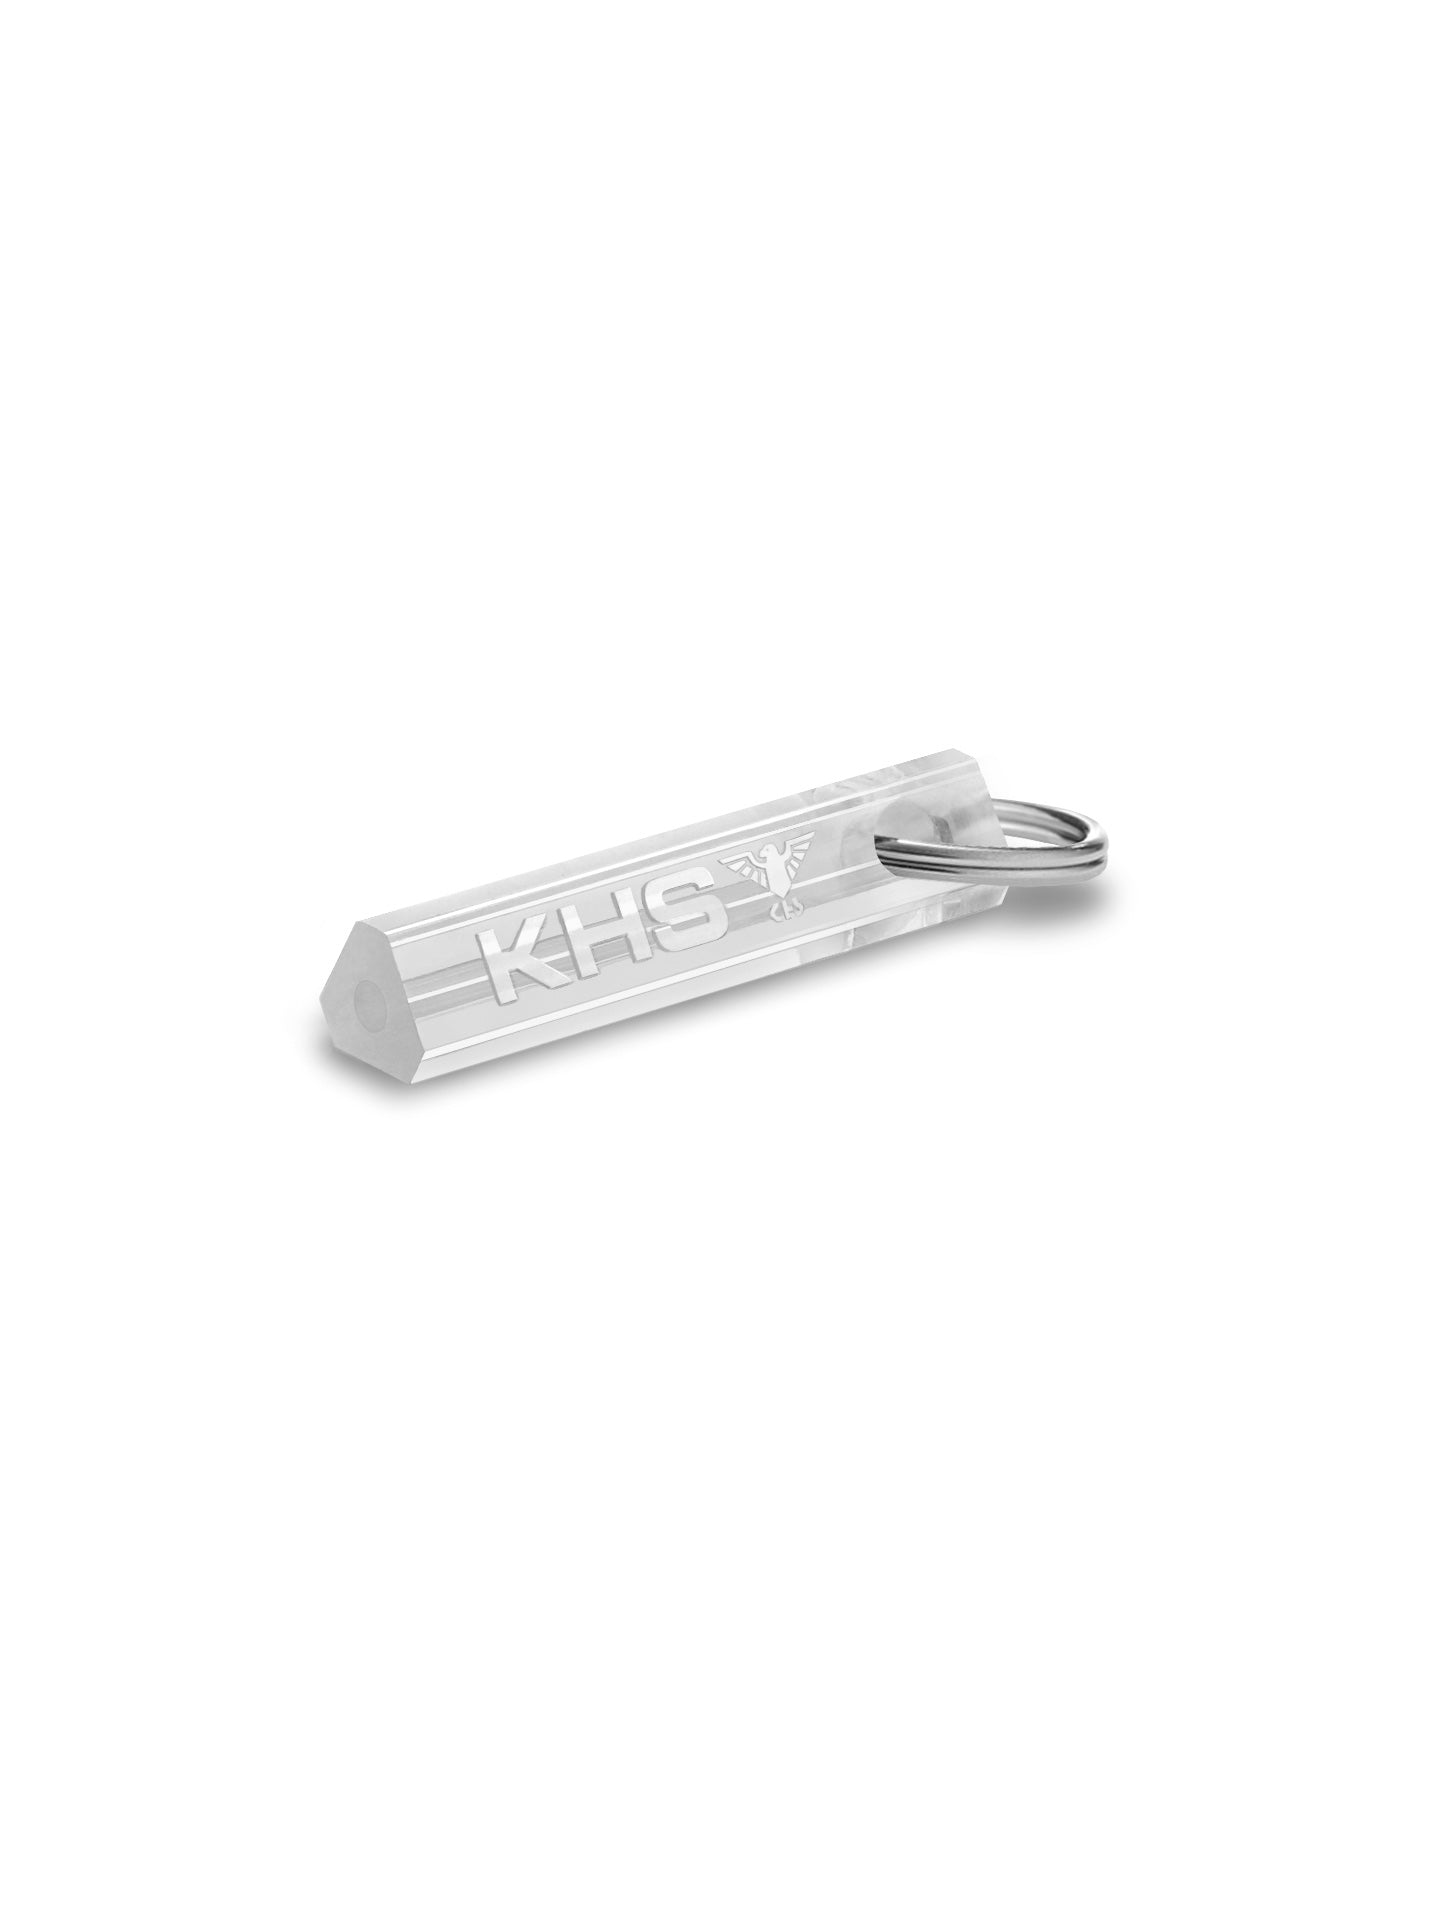 50 TRIGATAGS® with key ring